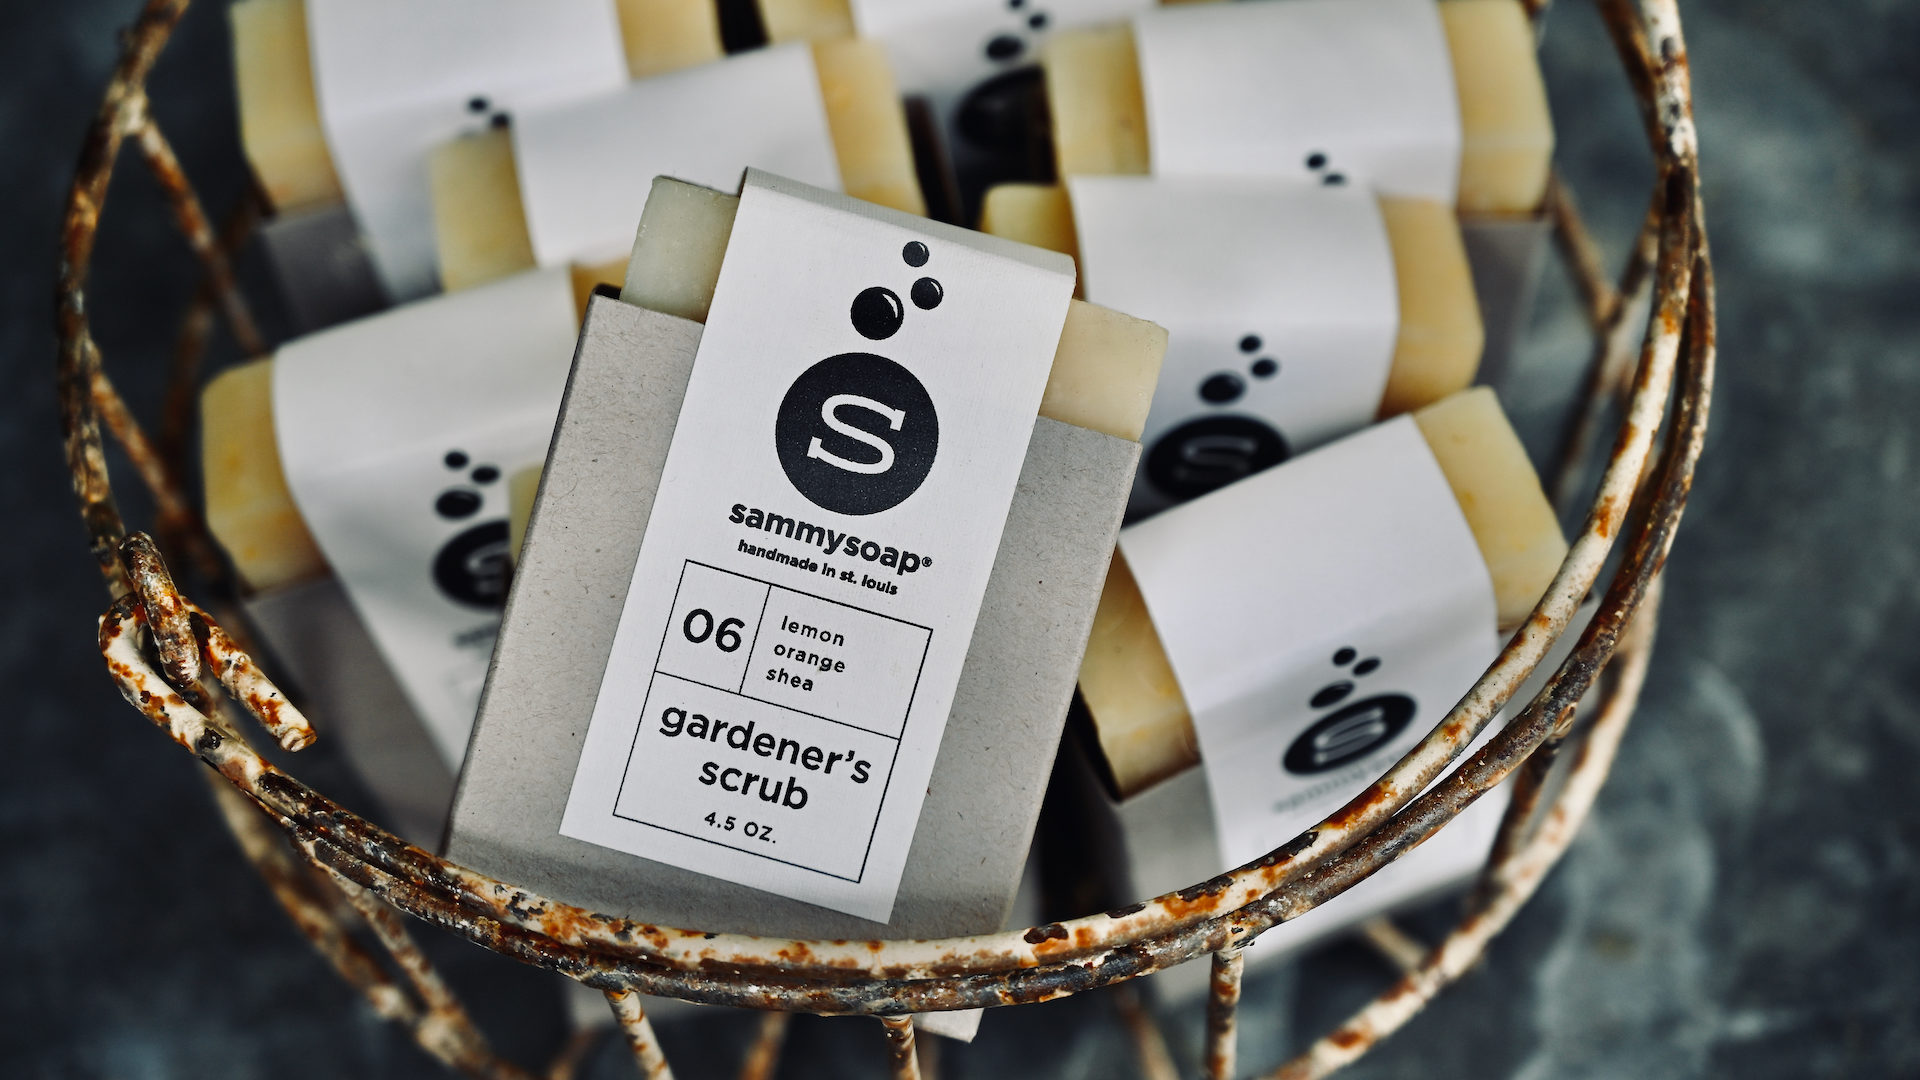 Shop: Made from organic, wildcrafted ingredients and consciously sourced for therapeutic value - Sammysoap Gardener's Scrub | Detroit Garden Works